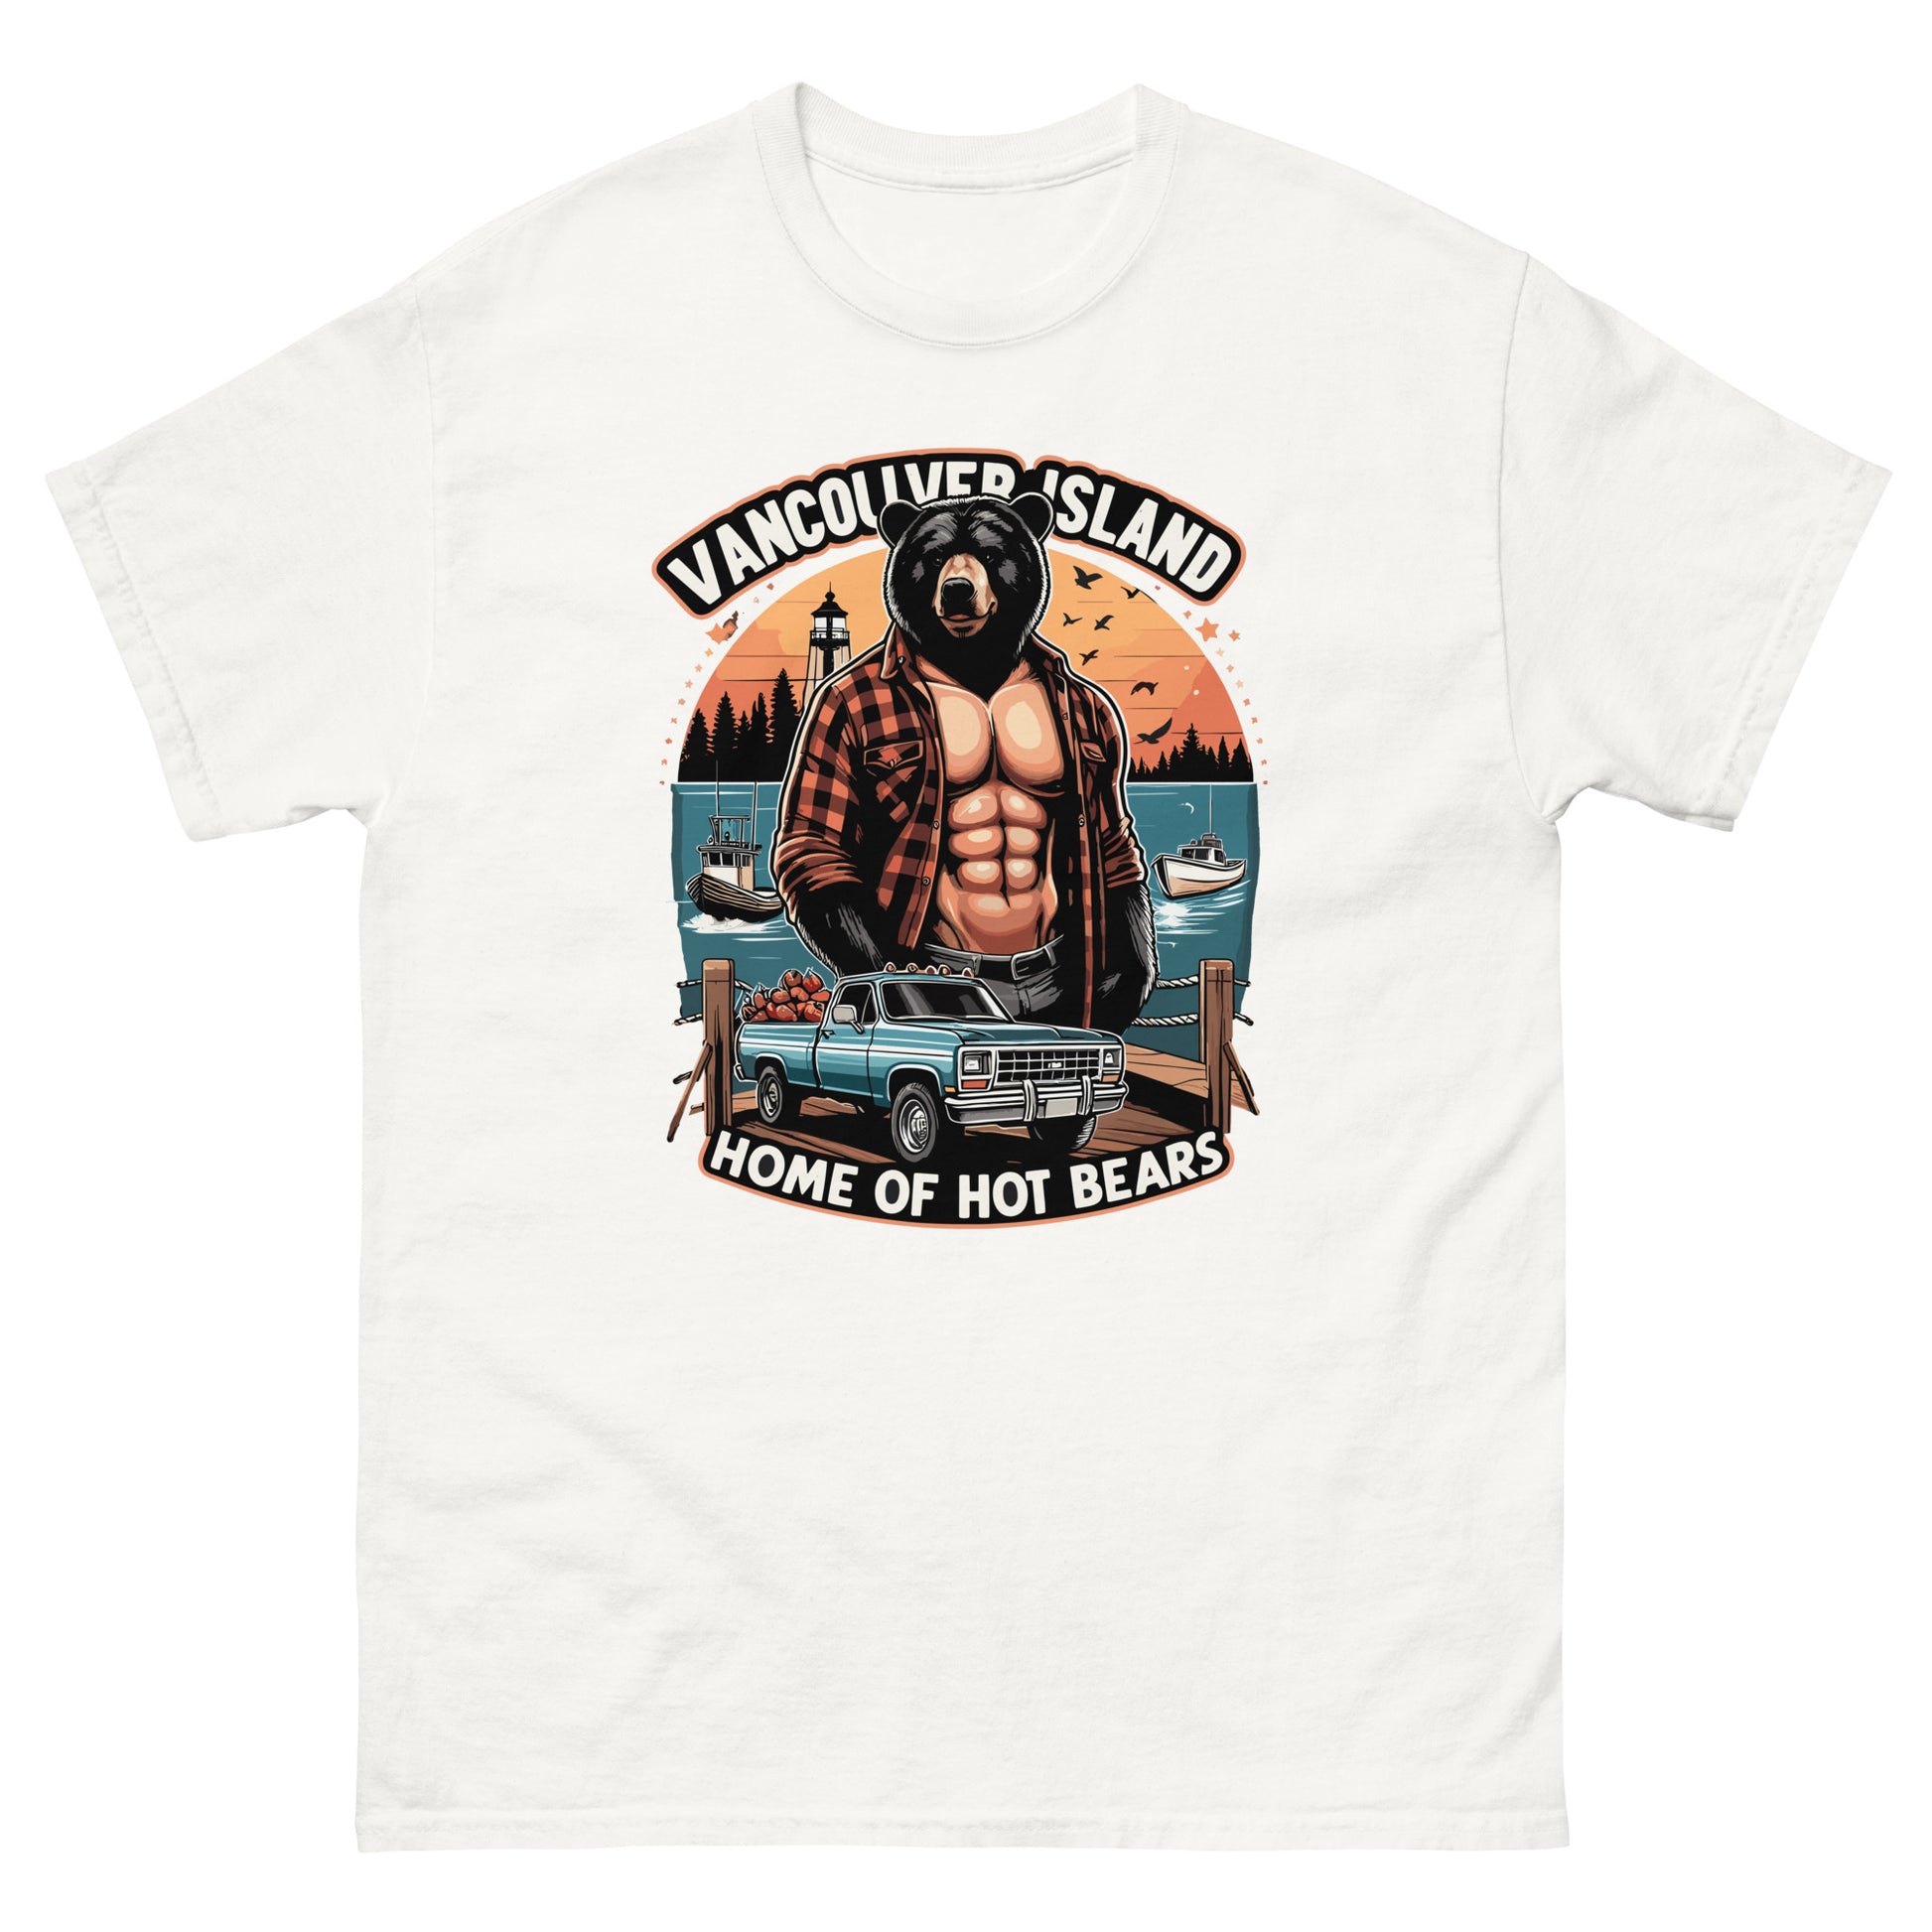 T-shirt with Vancouver Island Home of Bears print wtih a shirtless man with a bear head, truck and ocean behind, printed by Whistler Shirts